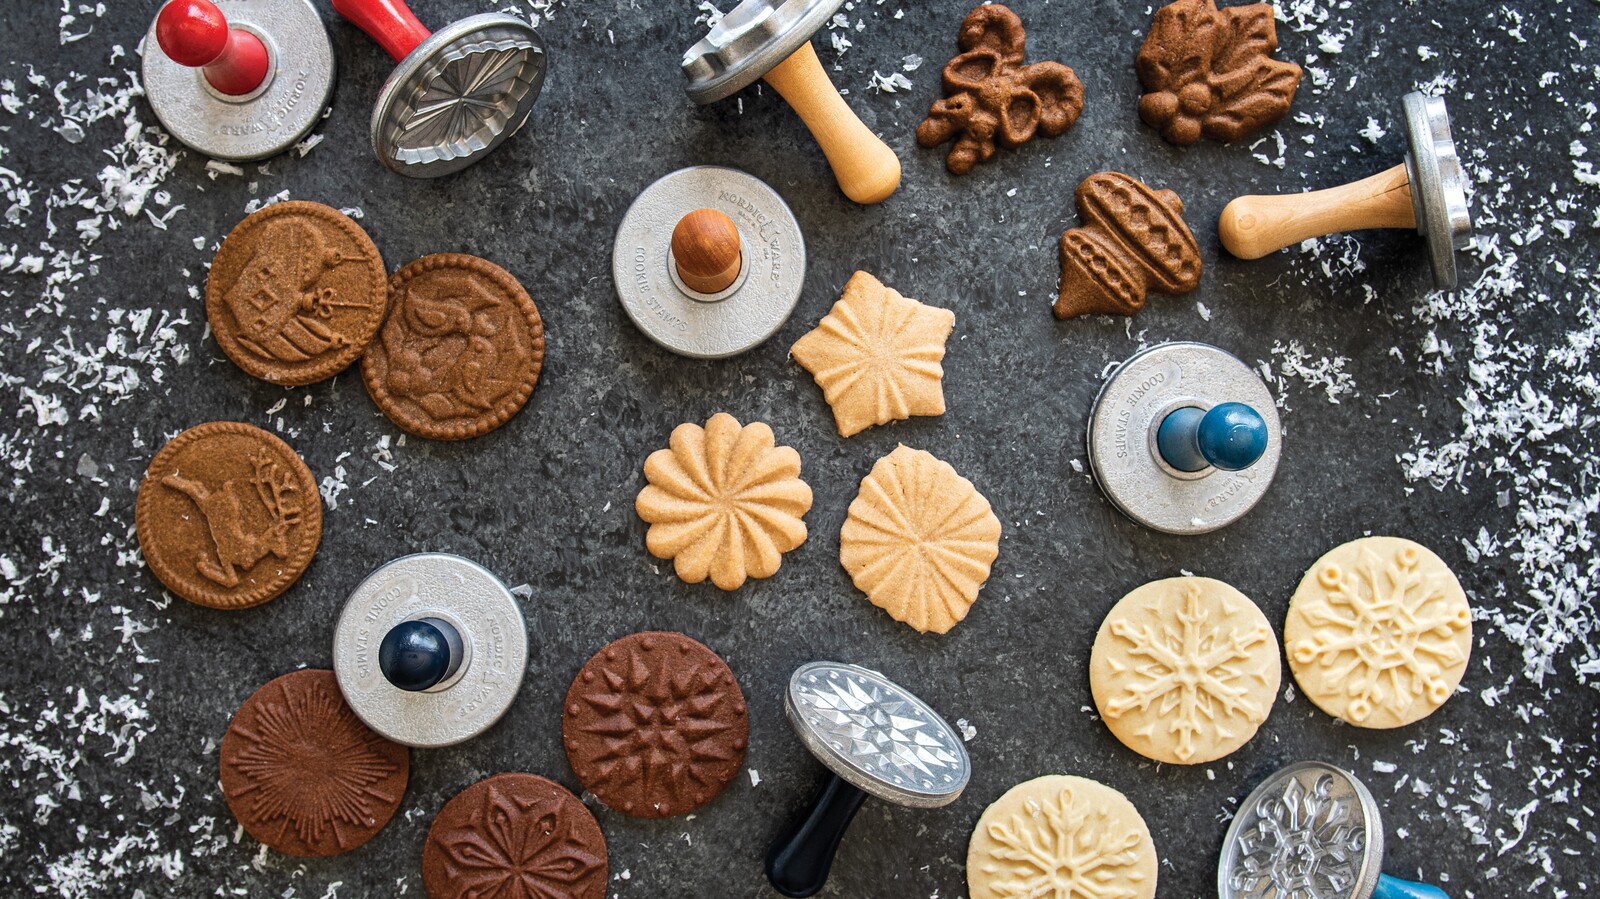 https://static.citylifestyle.com/articles/nordic-ware/Winter%20Cookie%20Stamps%20Group_06_E-1600.jpg?v=1